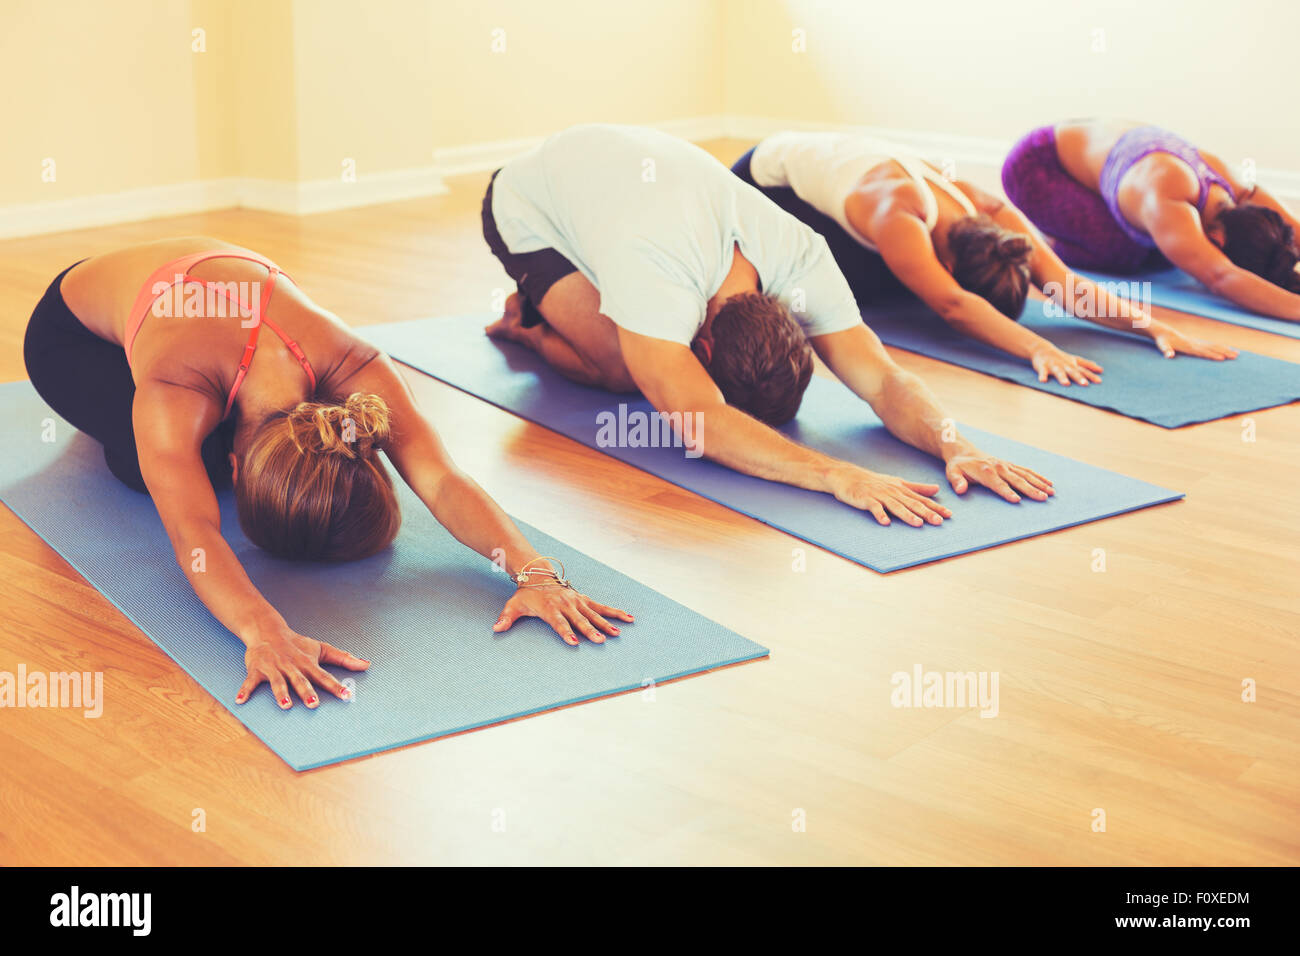 Yoga Class, Group of People Relaxing and Doing Yoga. Childs Pose. Wellness and Healthy Lifestyle. Stock Photo